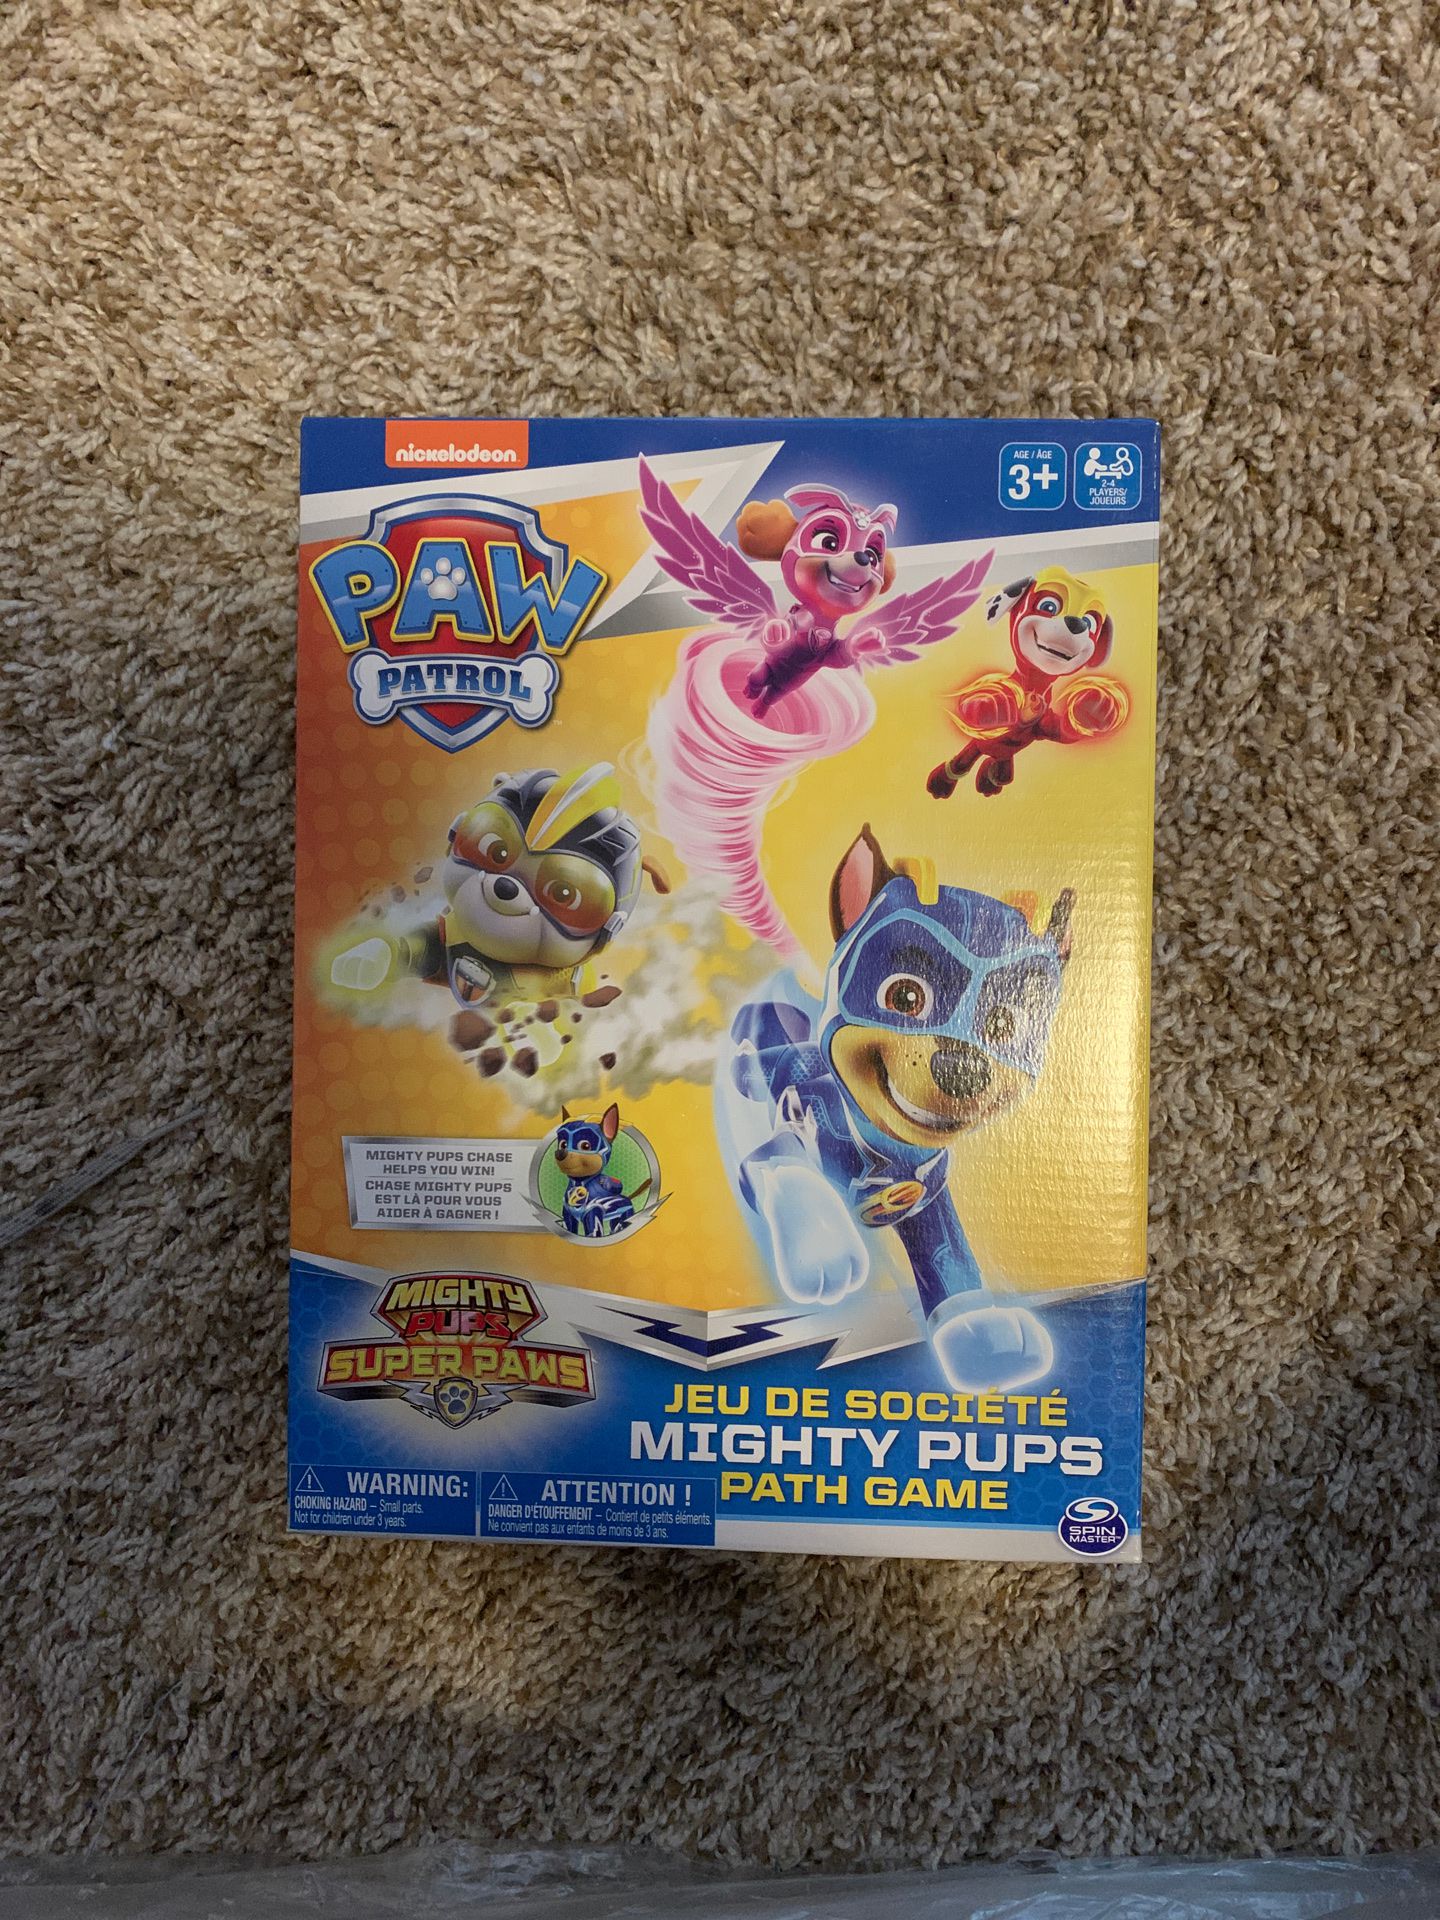 TOYS 2-4 PLAYERS NEW CHASE PAW PATROL MIGHTY PUPS PATH GAME 3 